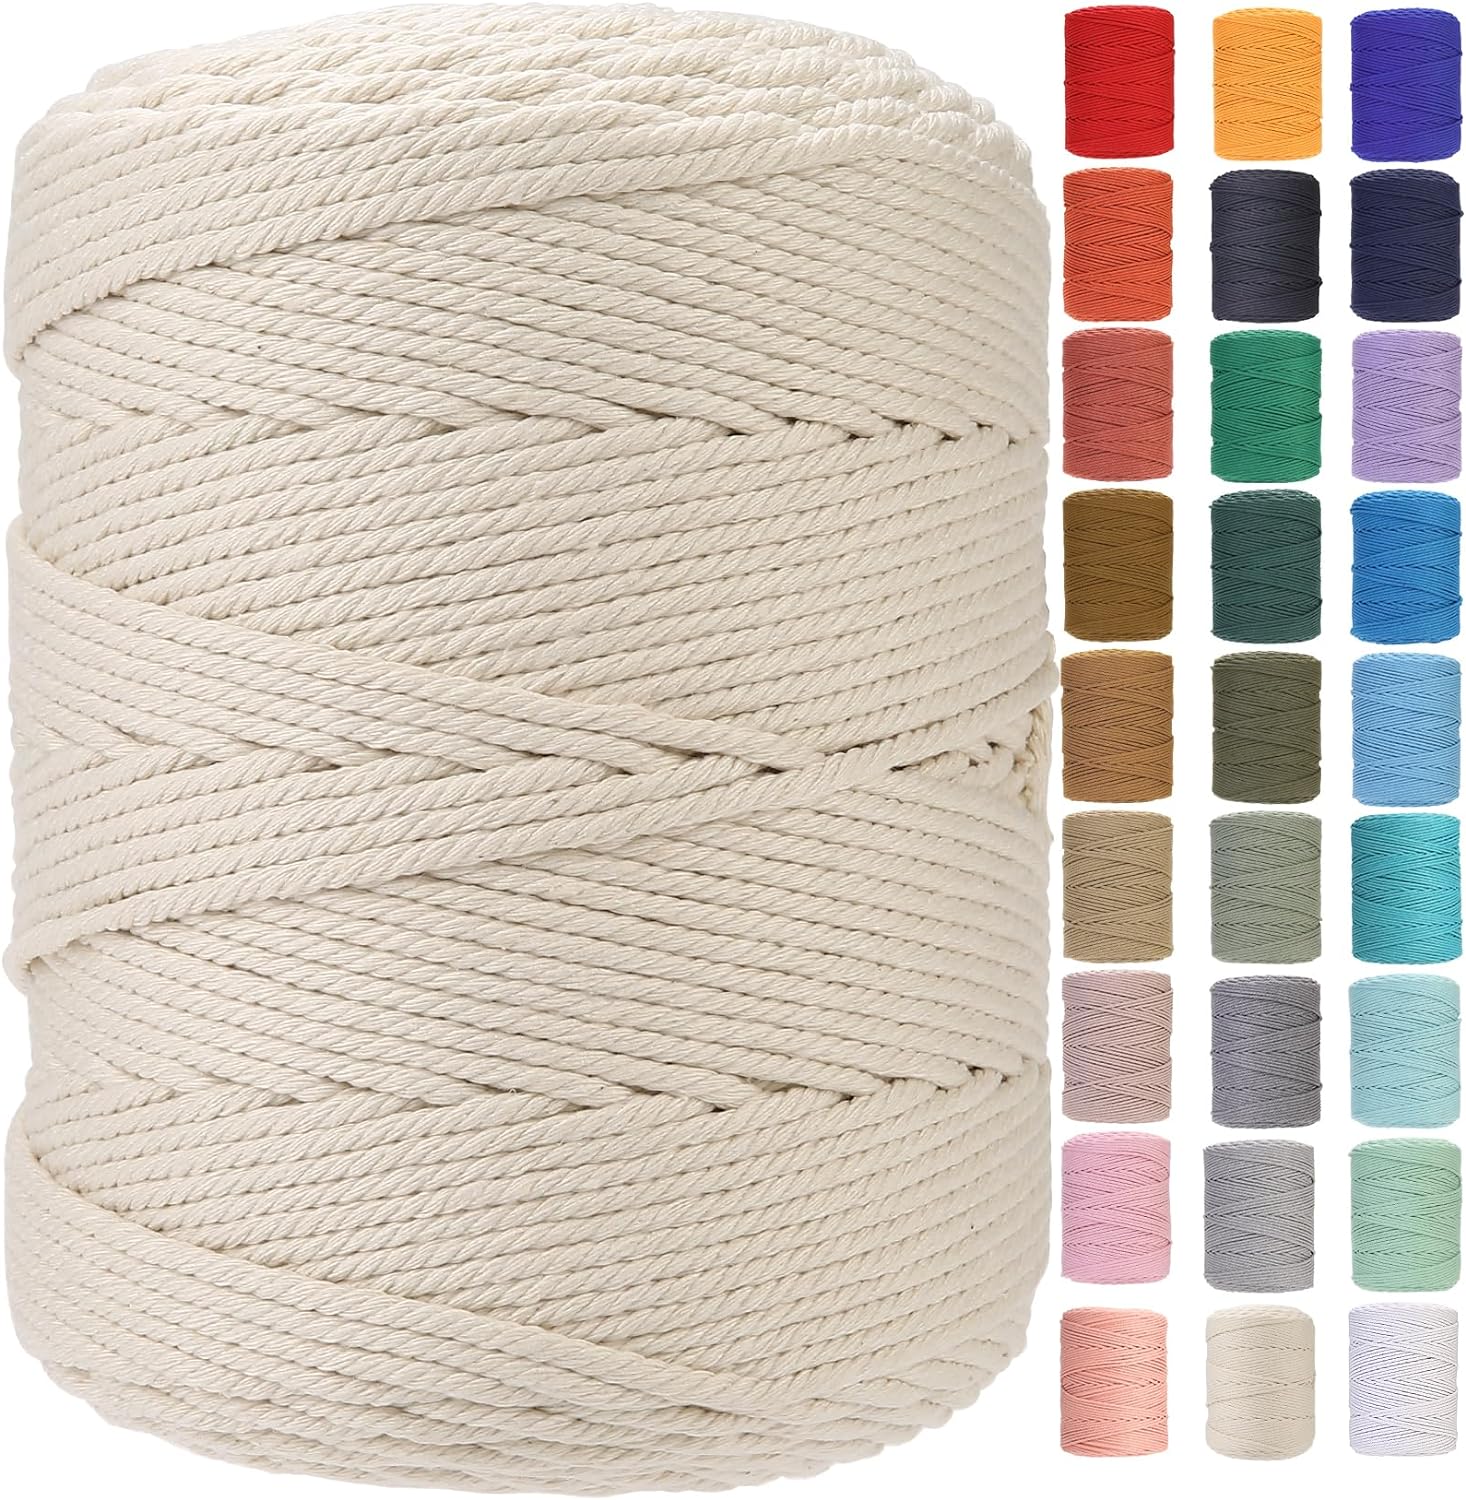 Xkdous Macrame Cord 4mm x 150yards, Natural Cotton Macrame Rope, Cotton Cord for Wall Hanging, Plant Hangers, Crafts, Knitting, Beige